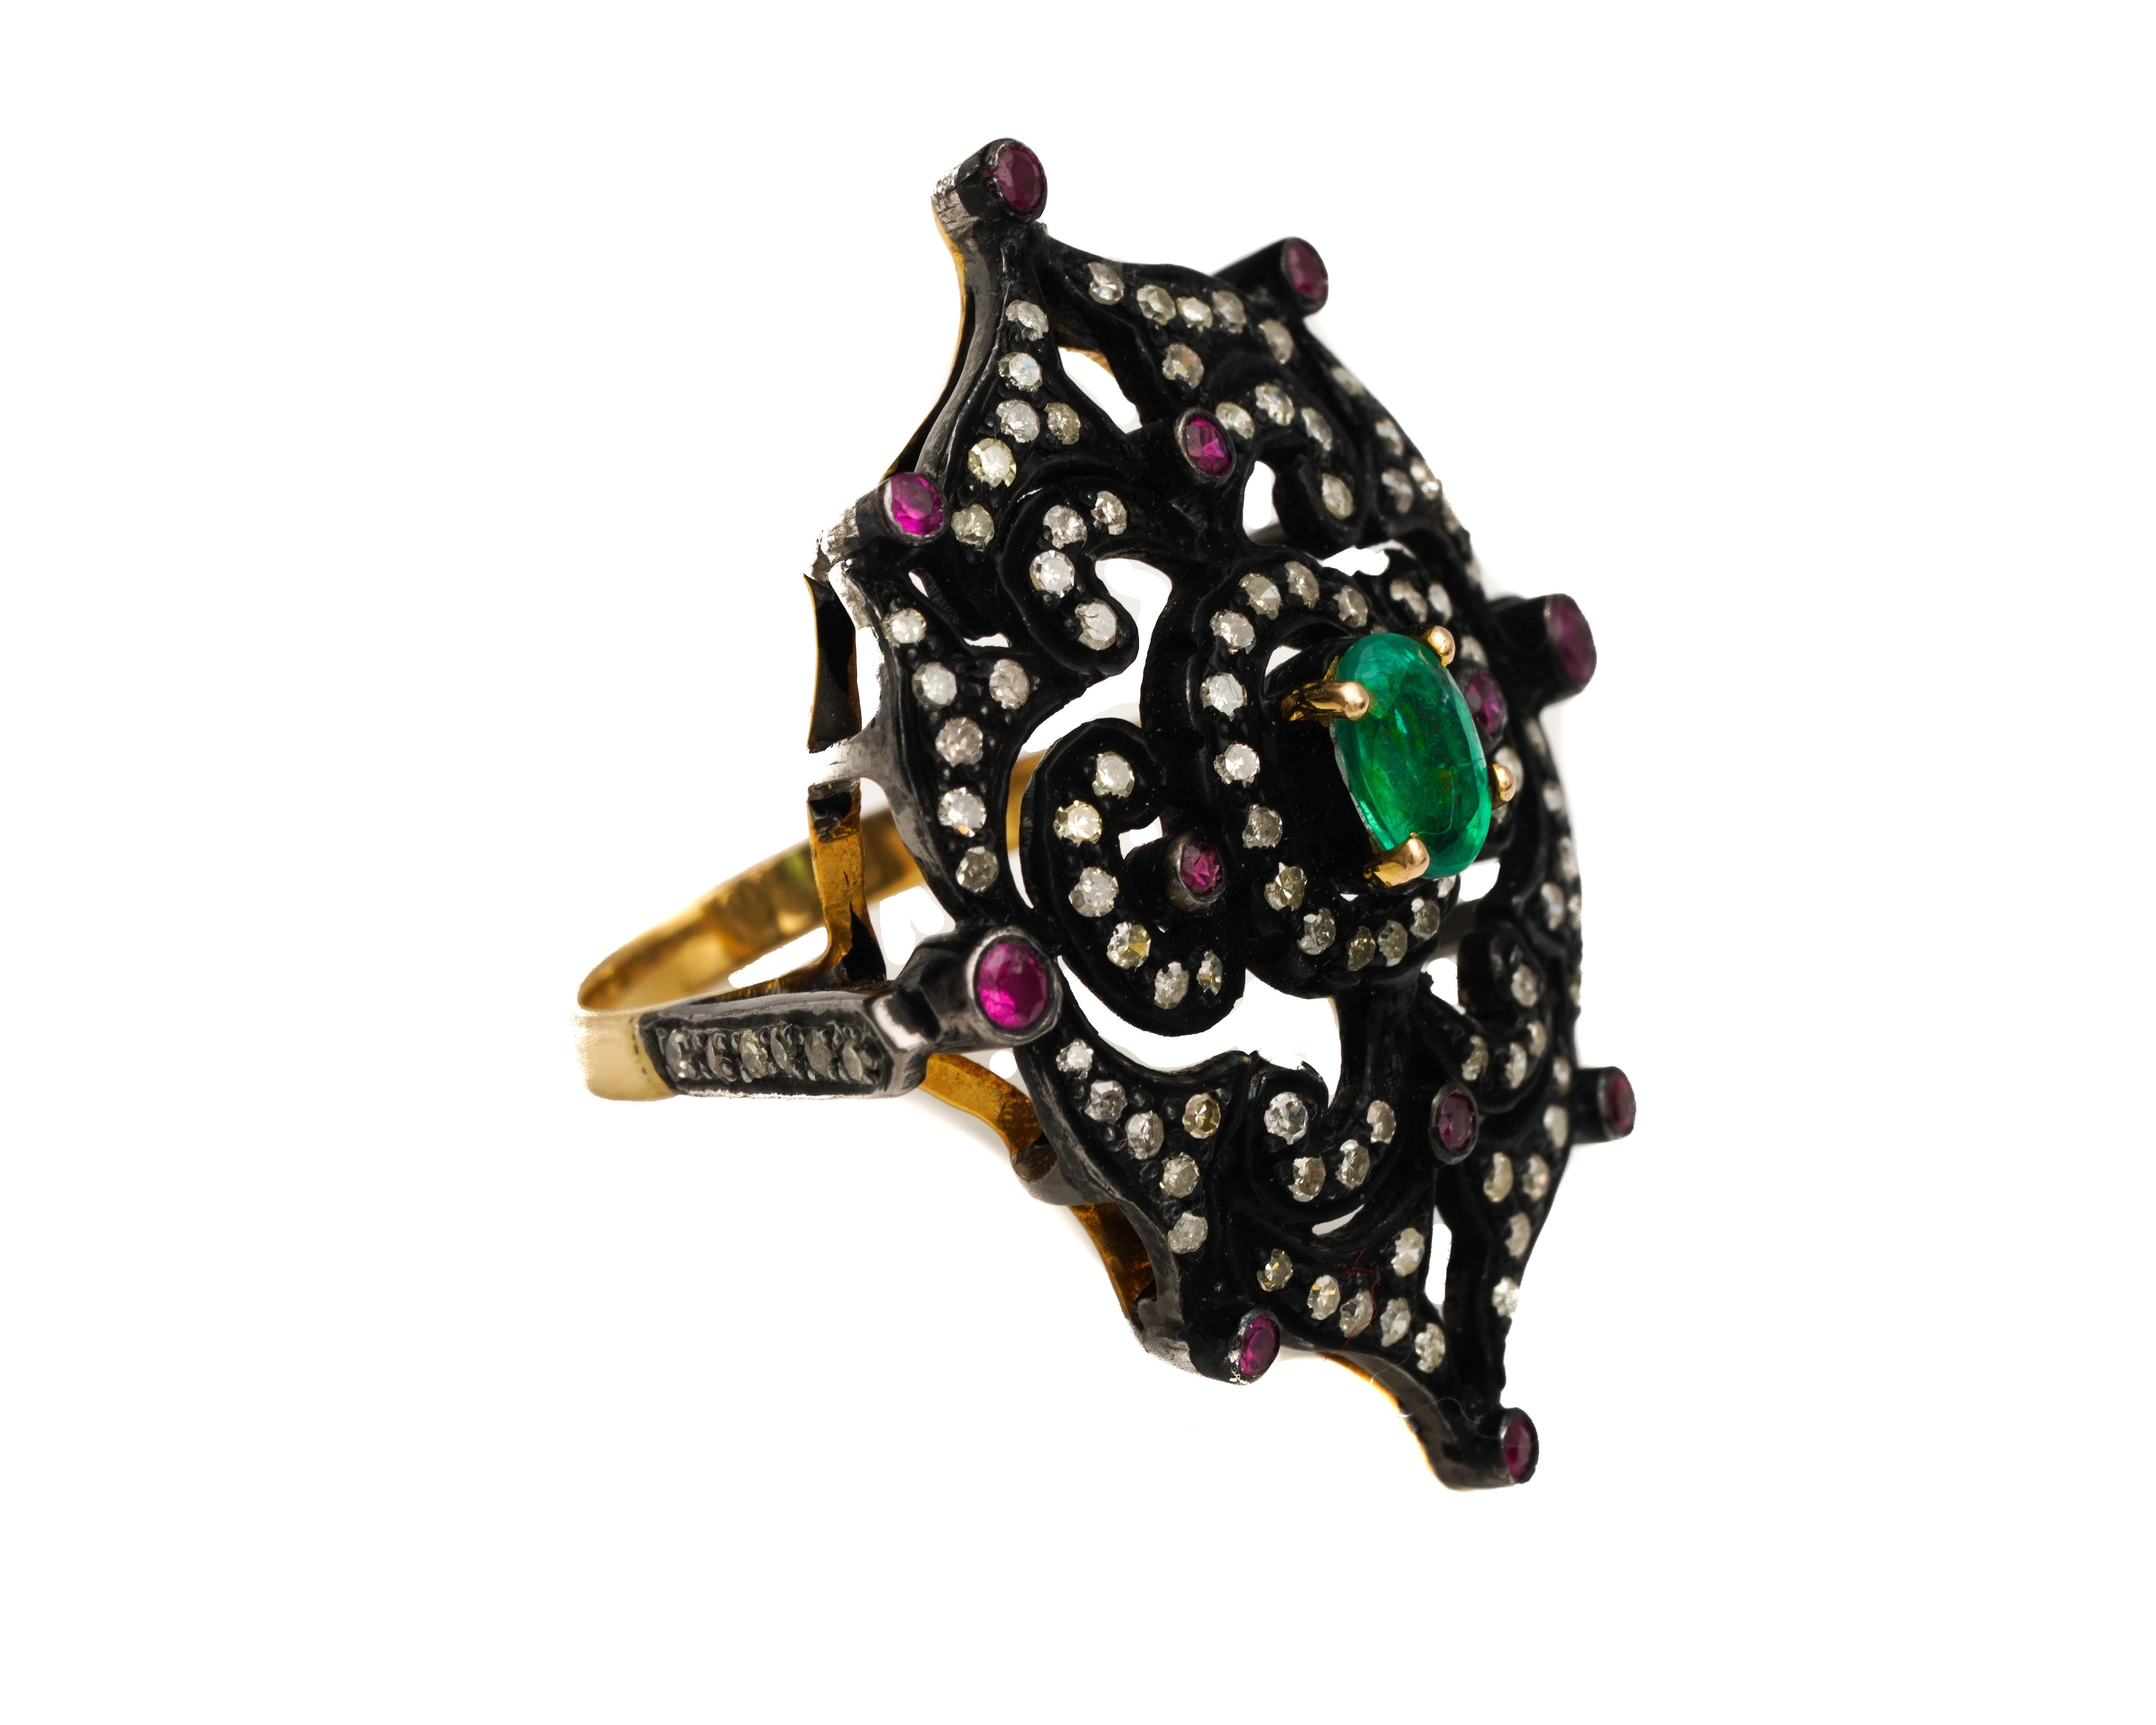 Ring Details:
Metal type: 18 Karat Yellow Gold, Black Gold and Silver
Weight: 7 grams
Size: 5 (resizable)

Features:
.25 Carat Total Weight Accent Diamonds, Round Cut, Symmetrically placed
.20 Carat Total Weight Ruby Accents, 12 stones, Round Cut,